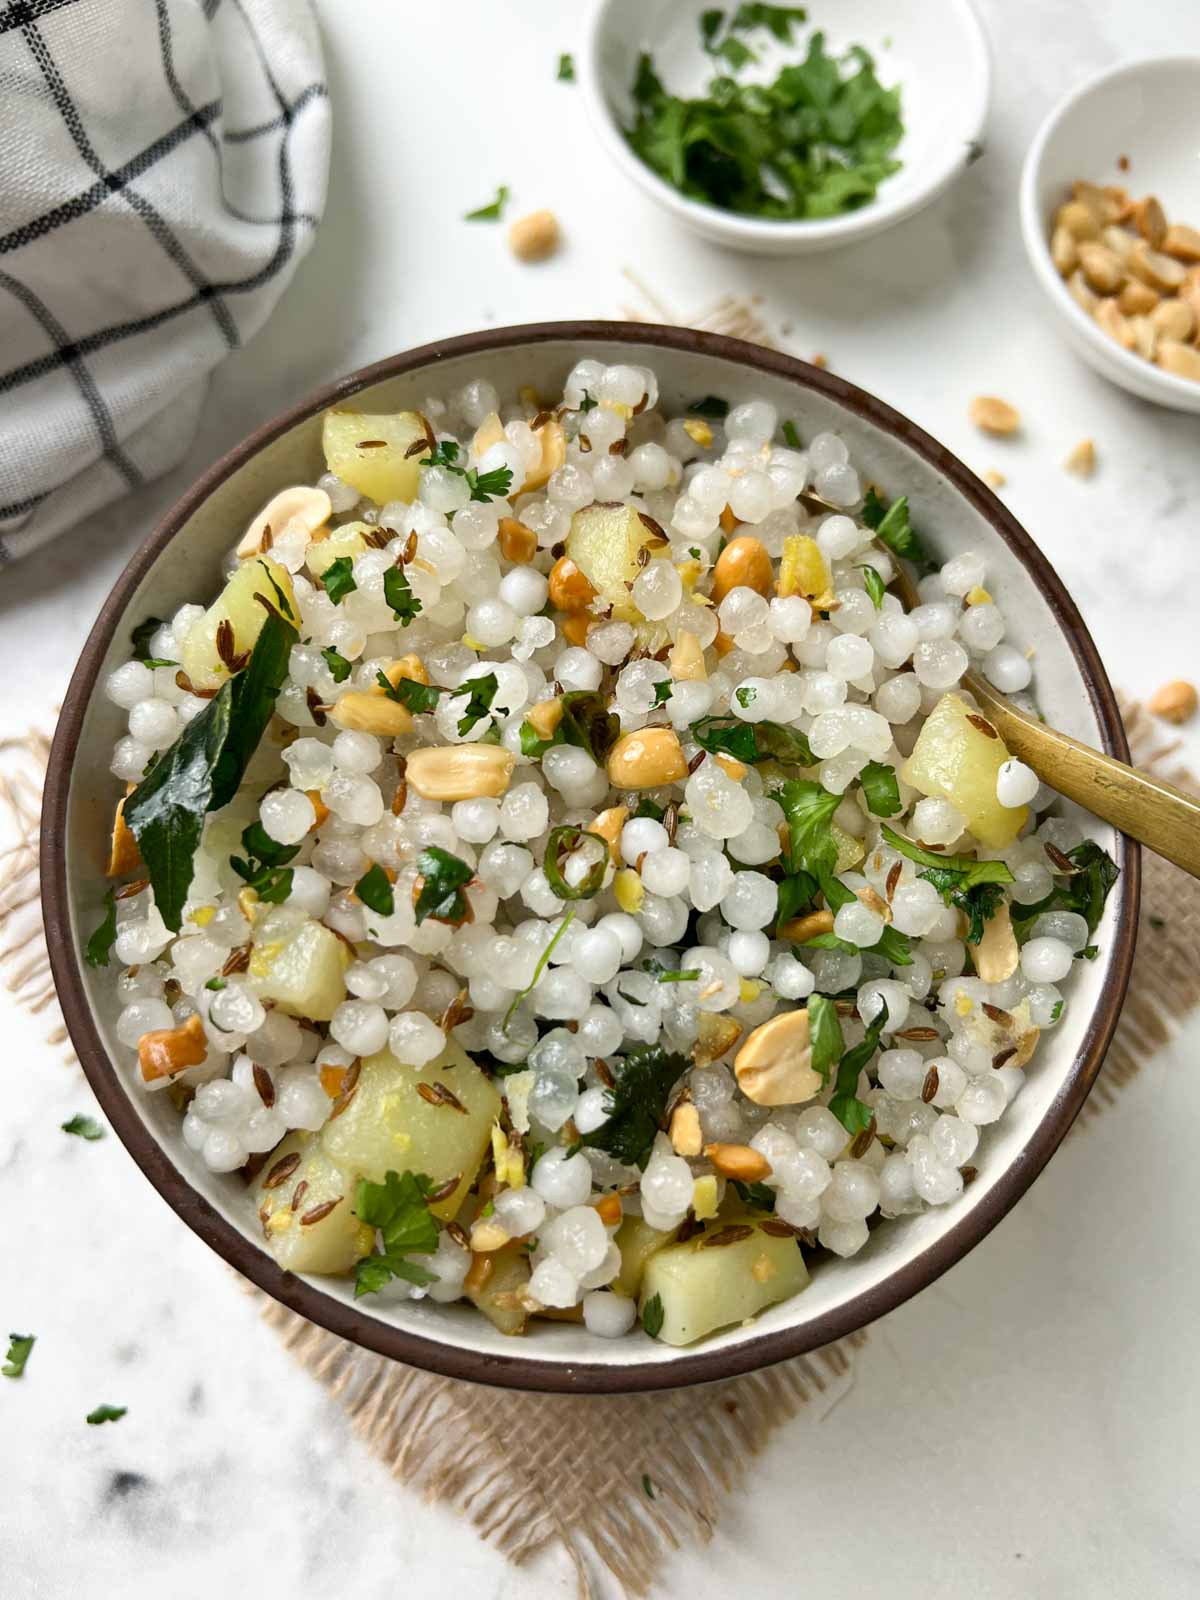 sabudana khichdi served in a bowl with roasted peanuts on the side